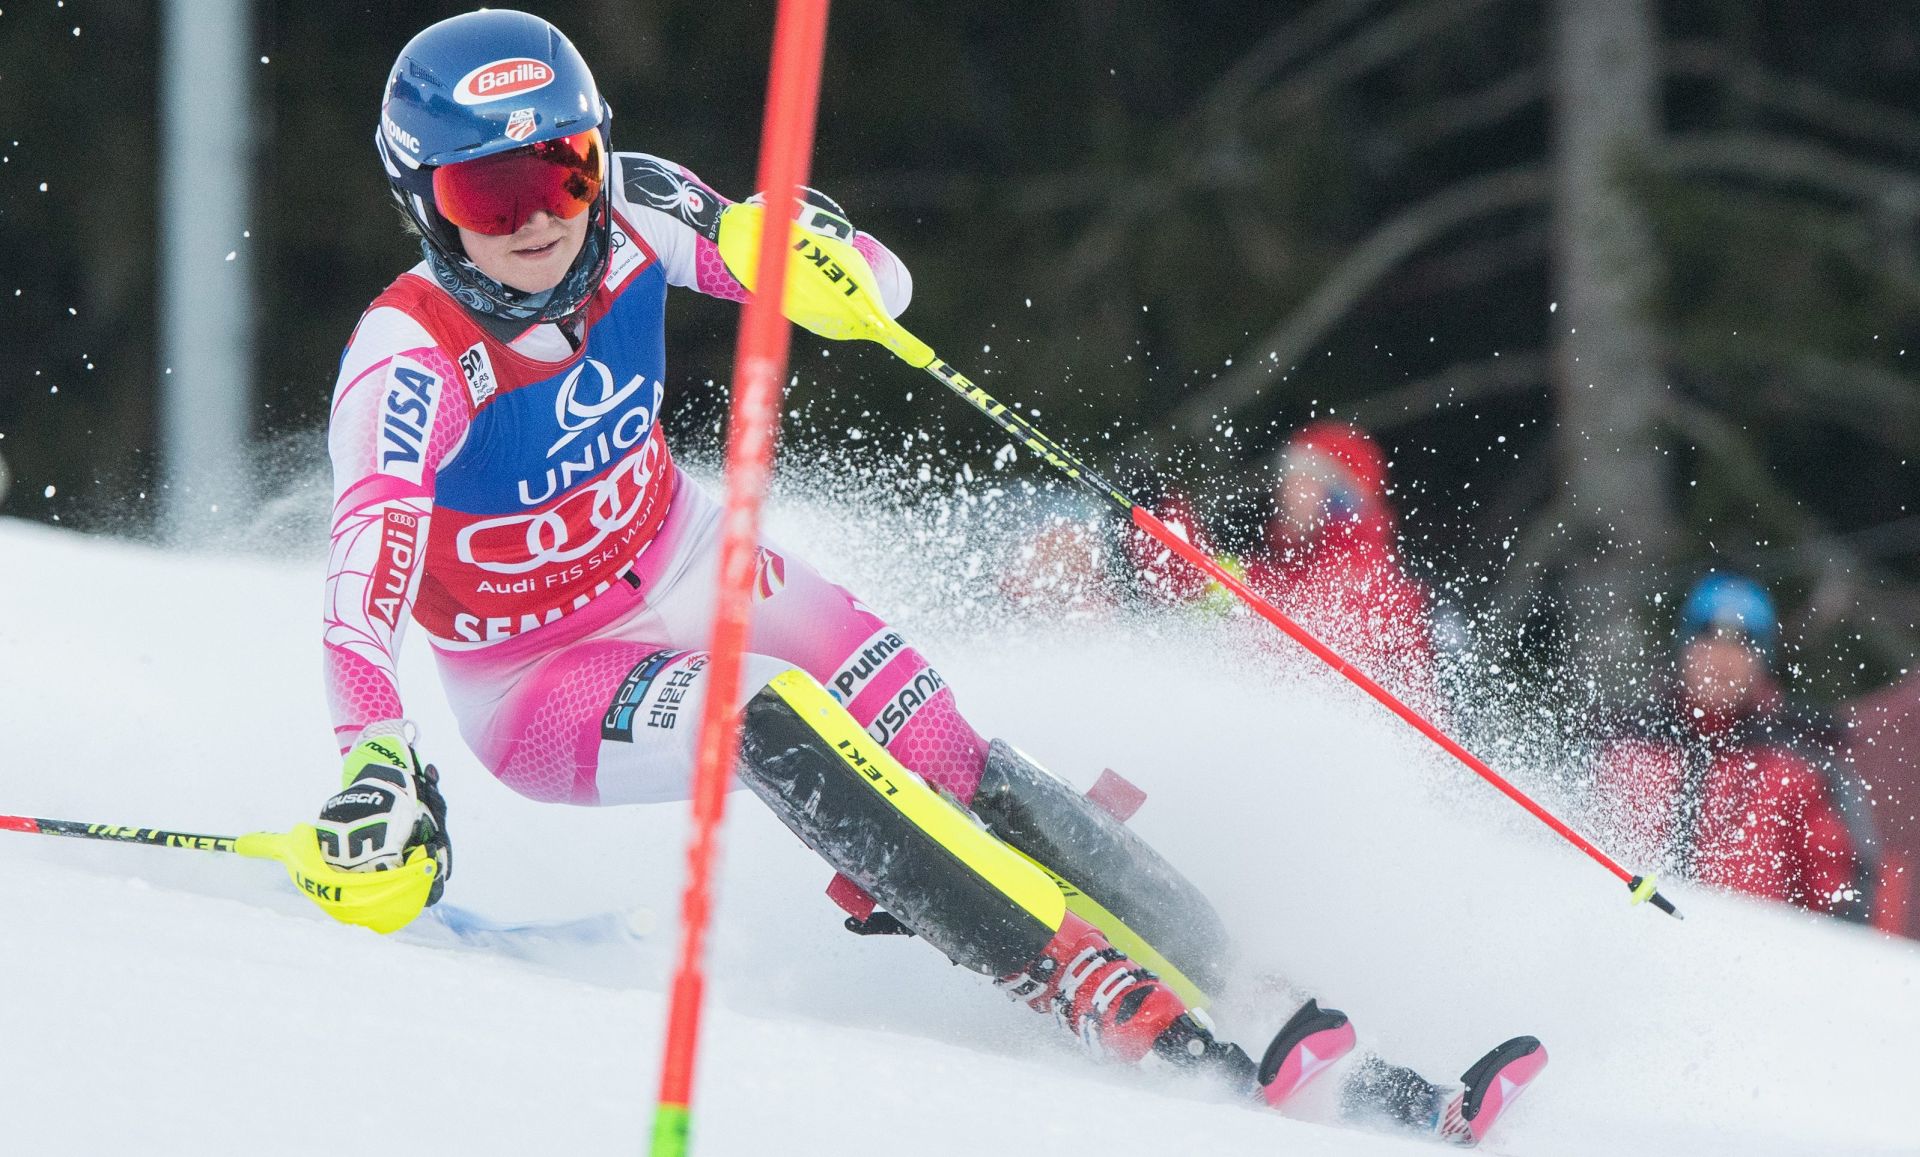 epa05690875 Mikaela Shiffrin of the USA clears a gate during the first run of the women's FIS Alpine Skiing World Cup Slalom race in Semmering, Austria, 29 December 2016.  EPA/CHRISTIAN BRUNA